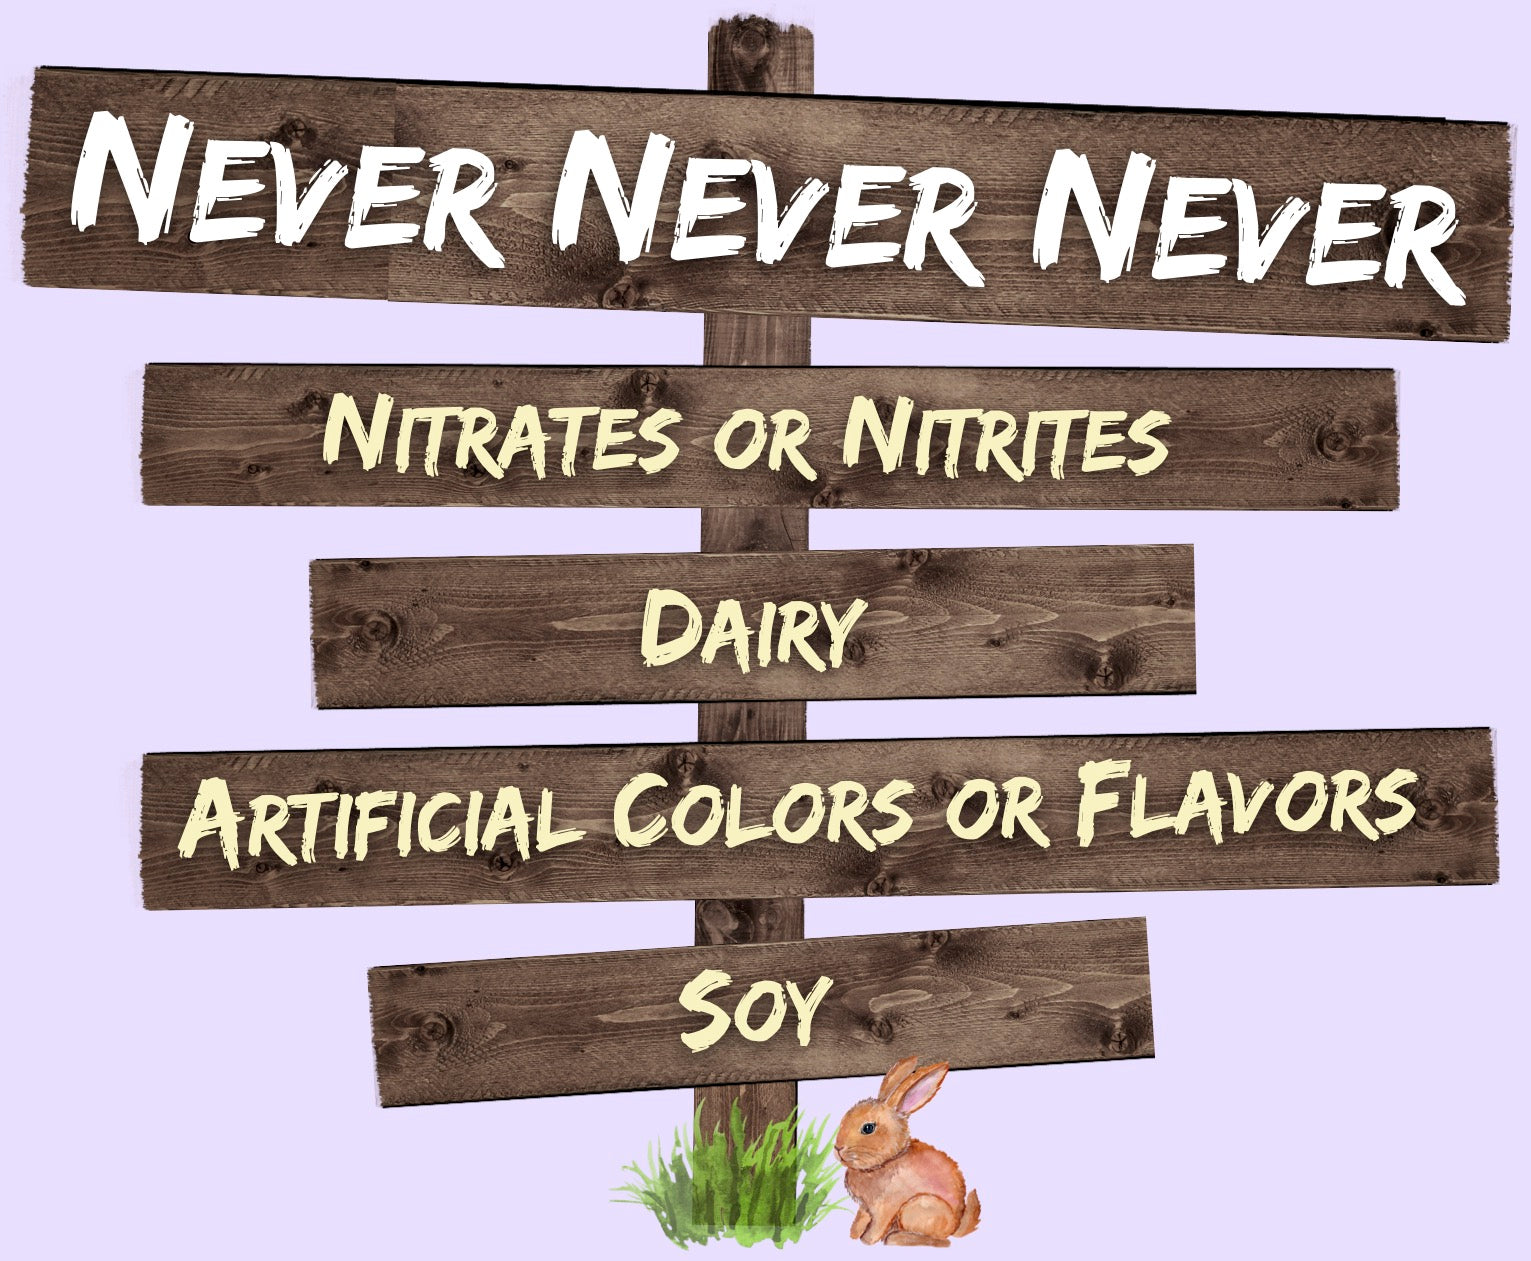 Wooden Signs saying "Never, Never, Never: Nitrates or Nitrites, Dairy, Artifical Colors or Flavors, or Soy.